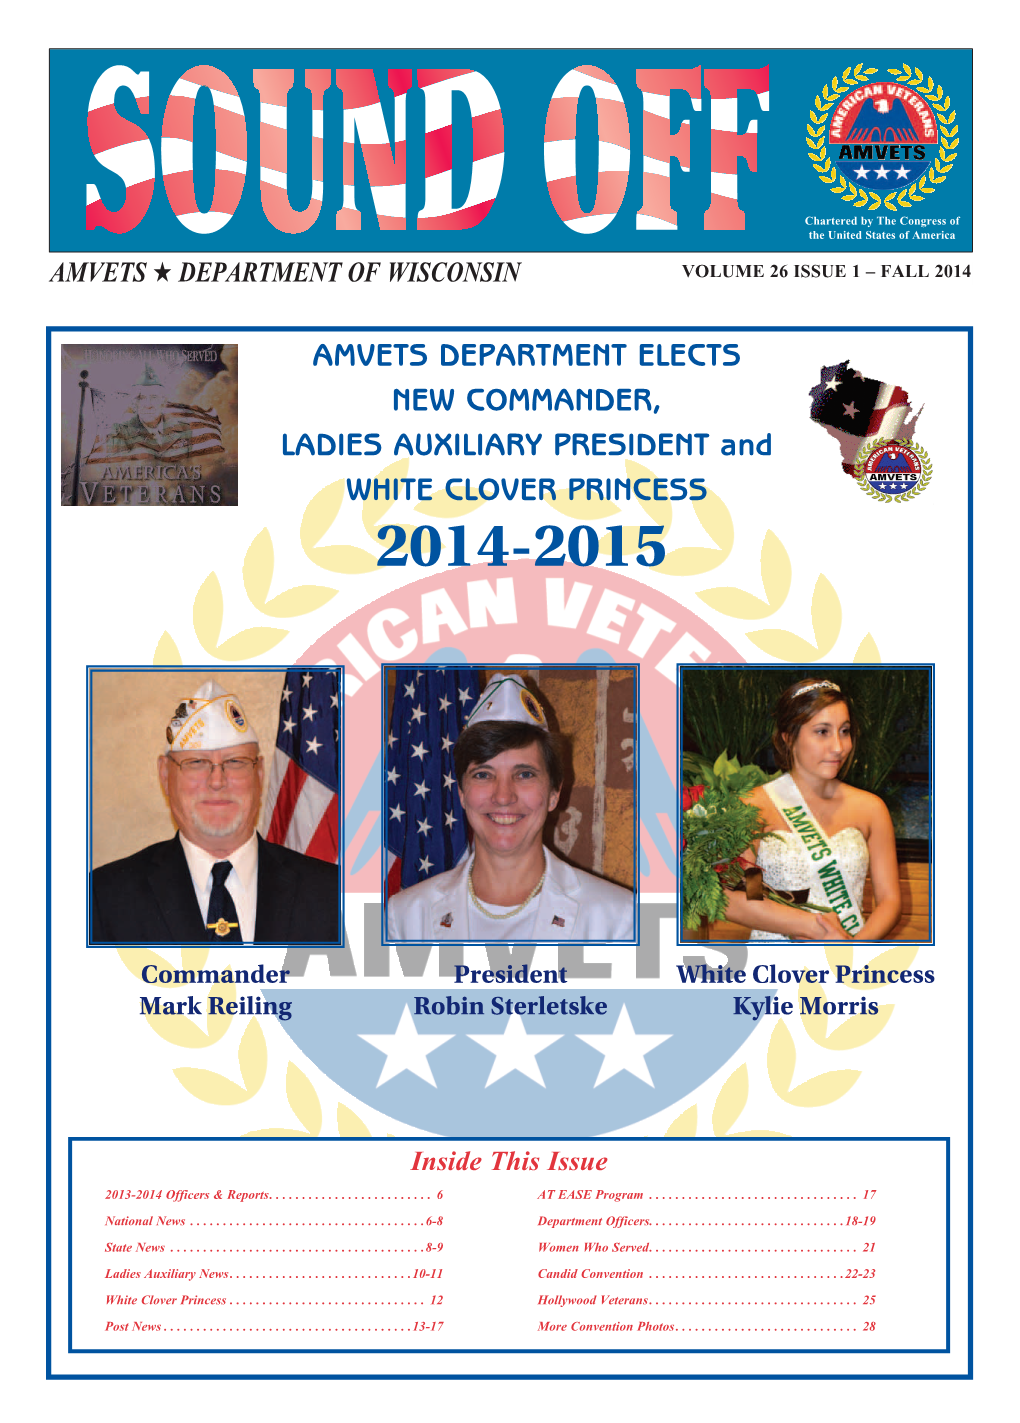 AMVETS DEPARTMENT ELECTS NEW COMMANDER, LADIES AUXILIARY PRESIDENT and WHITE CLOVER PRINCESS 2014-2015